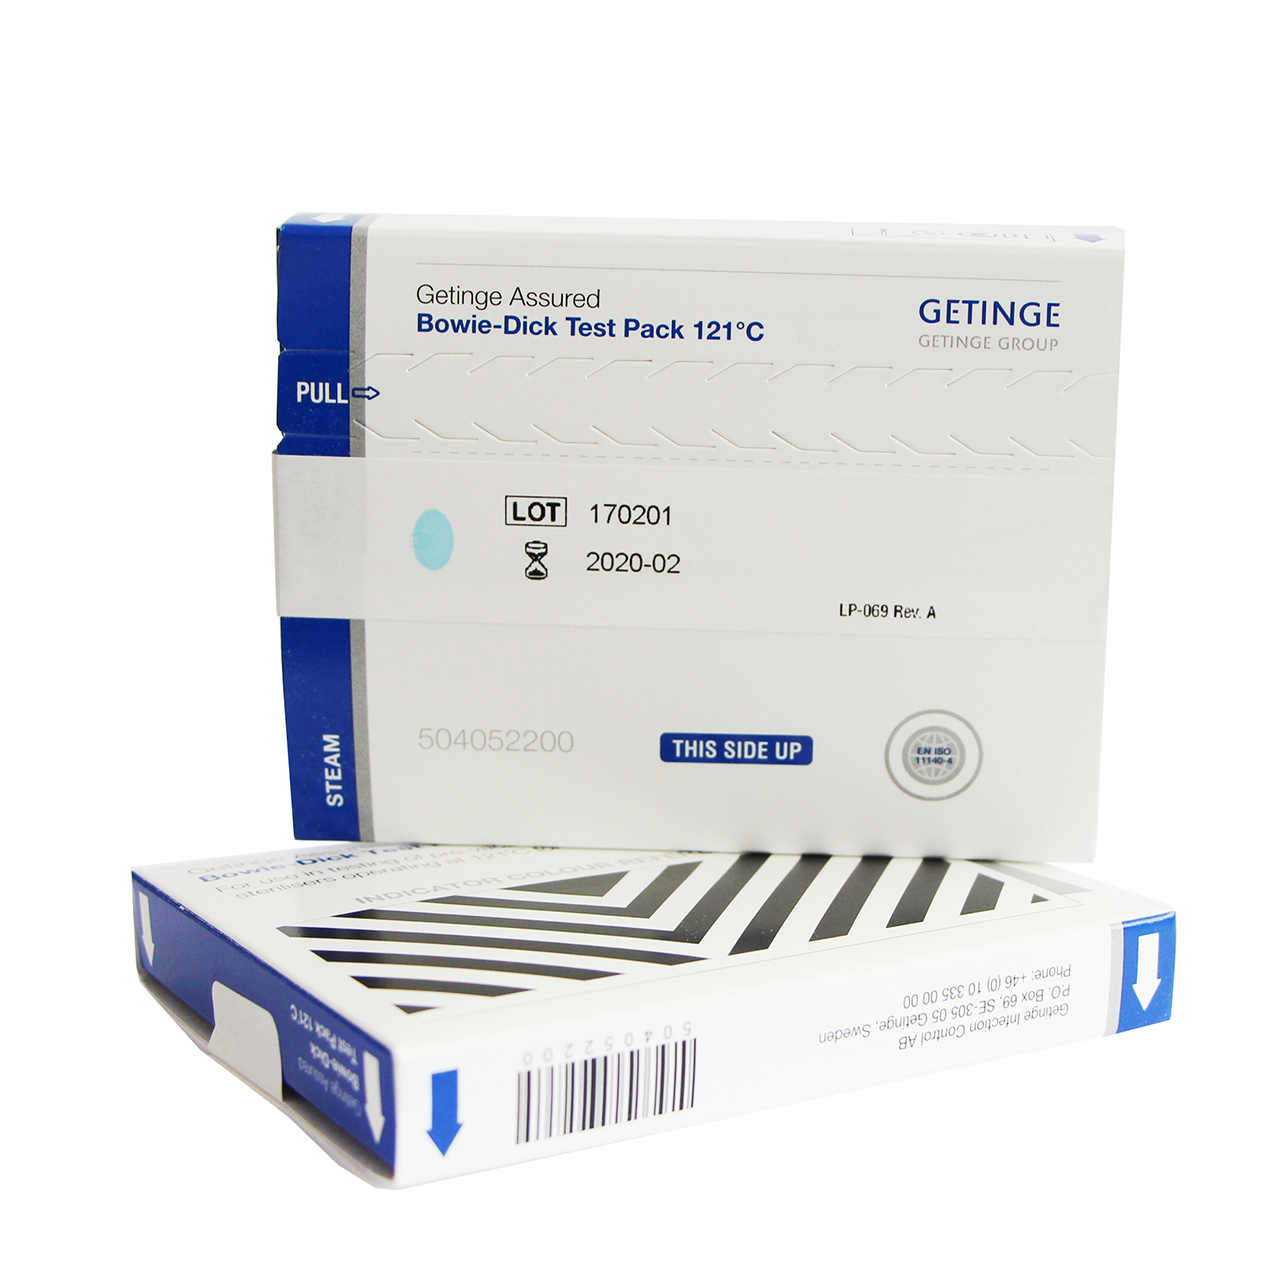 Getinge Assured Bowie-Dick Test Pack 121 is for daily monitoring of steam sterilizers operating at 121C